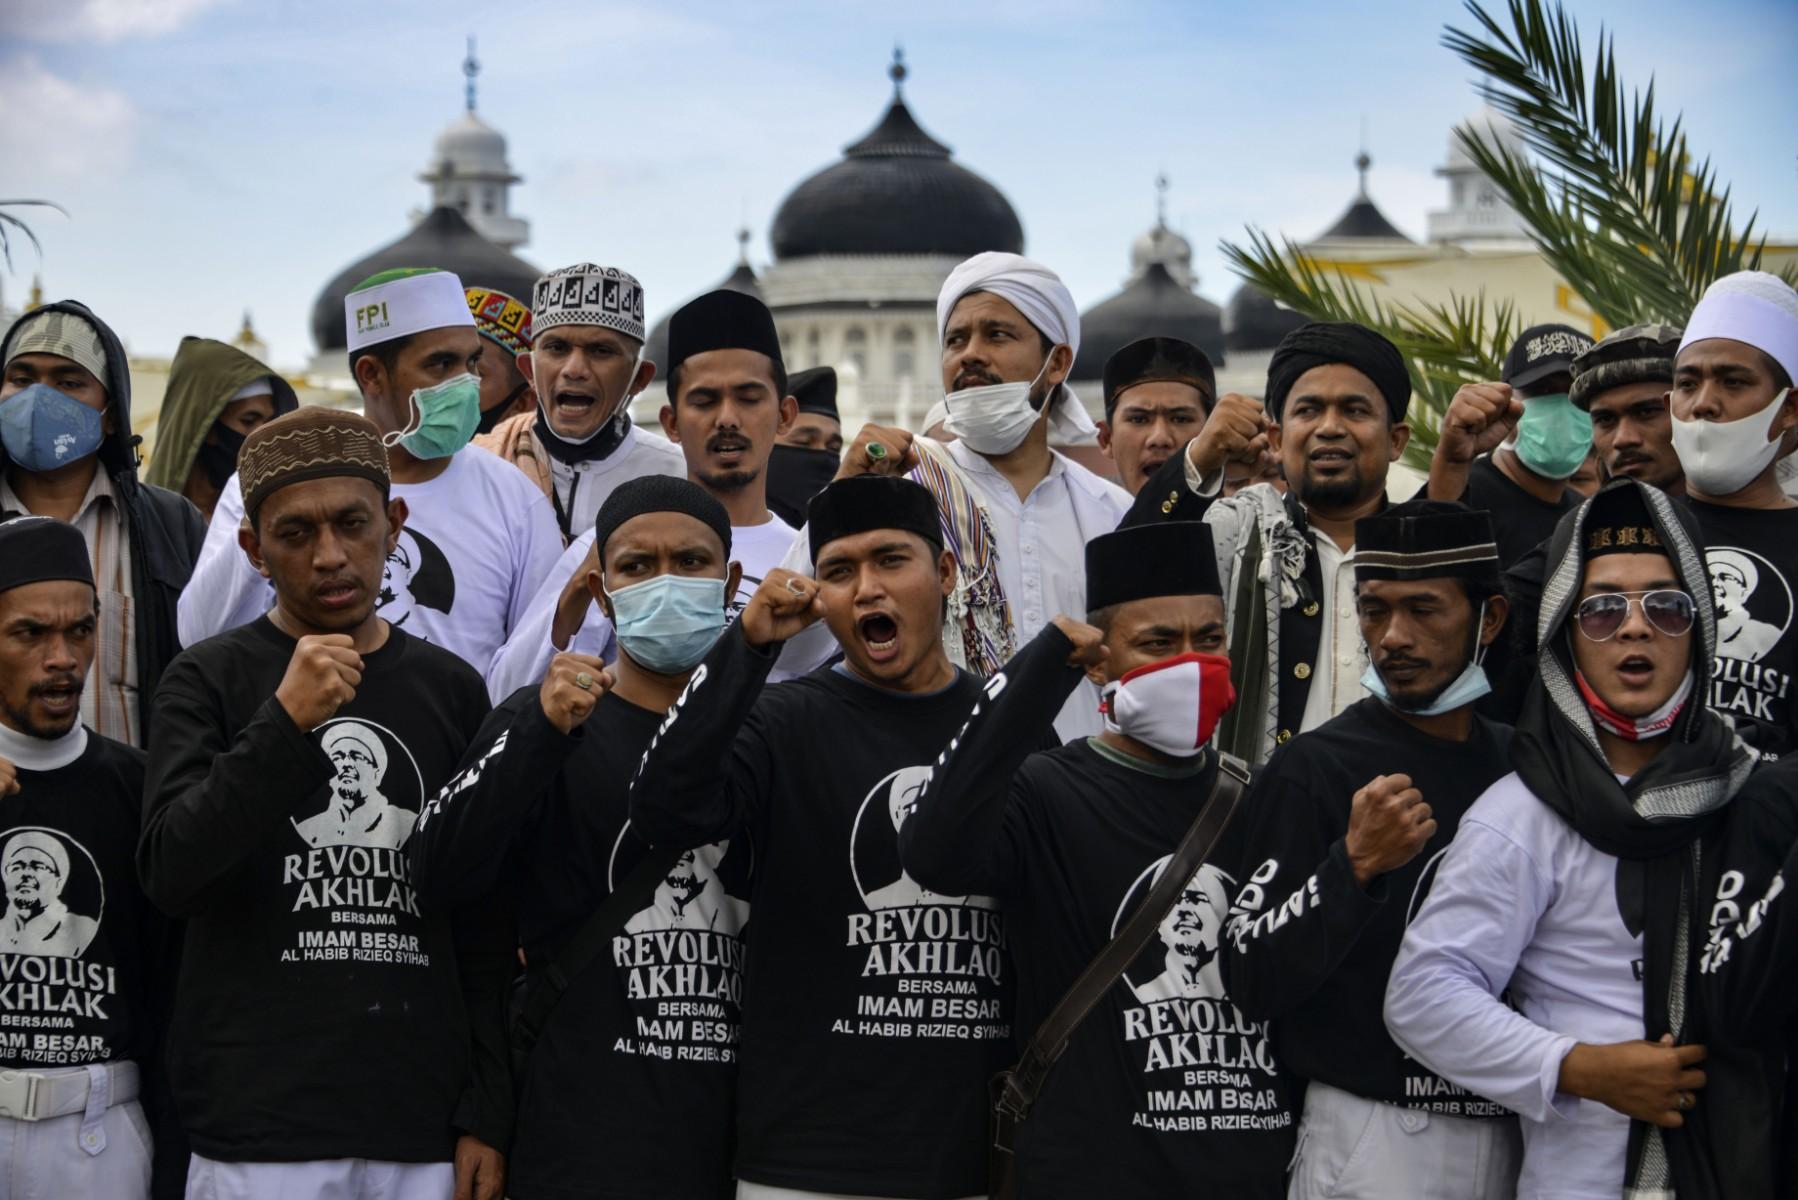 Supporters of Rizieq Shihab, leader of Indonesian hardline organisation Islamic Defenders Front, gather in a show of support for the firebrand cleric in front of the Baiturrahman grand mosque in Banda Aceh on Dec 8, 2020. Rizieq was jailed for spreading false information about Covid-19. Photo: AFP